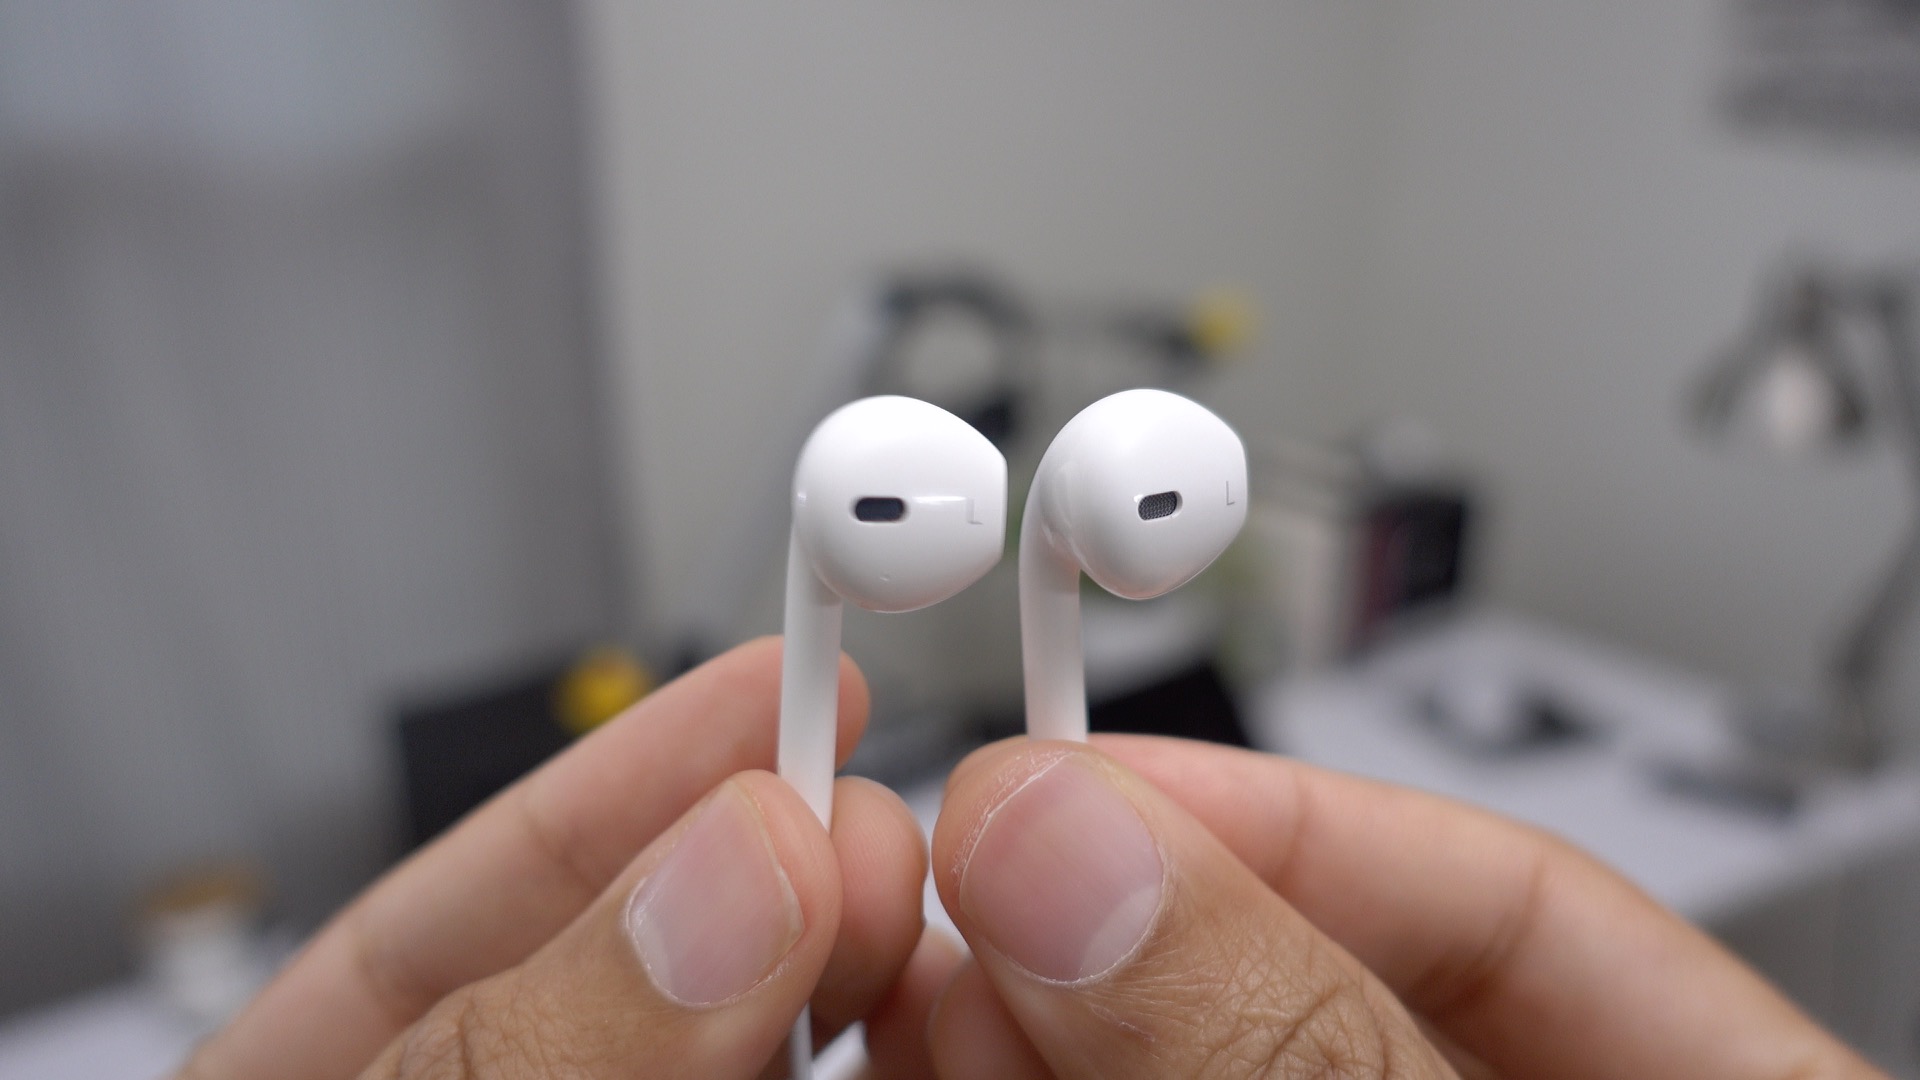 Apple\'s new $19 USB-C EarPods apparently support lossless audio - 9to5Mac